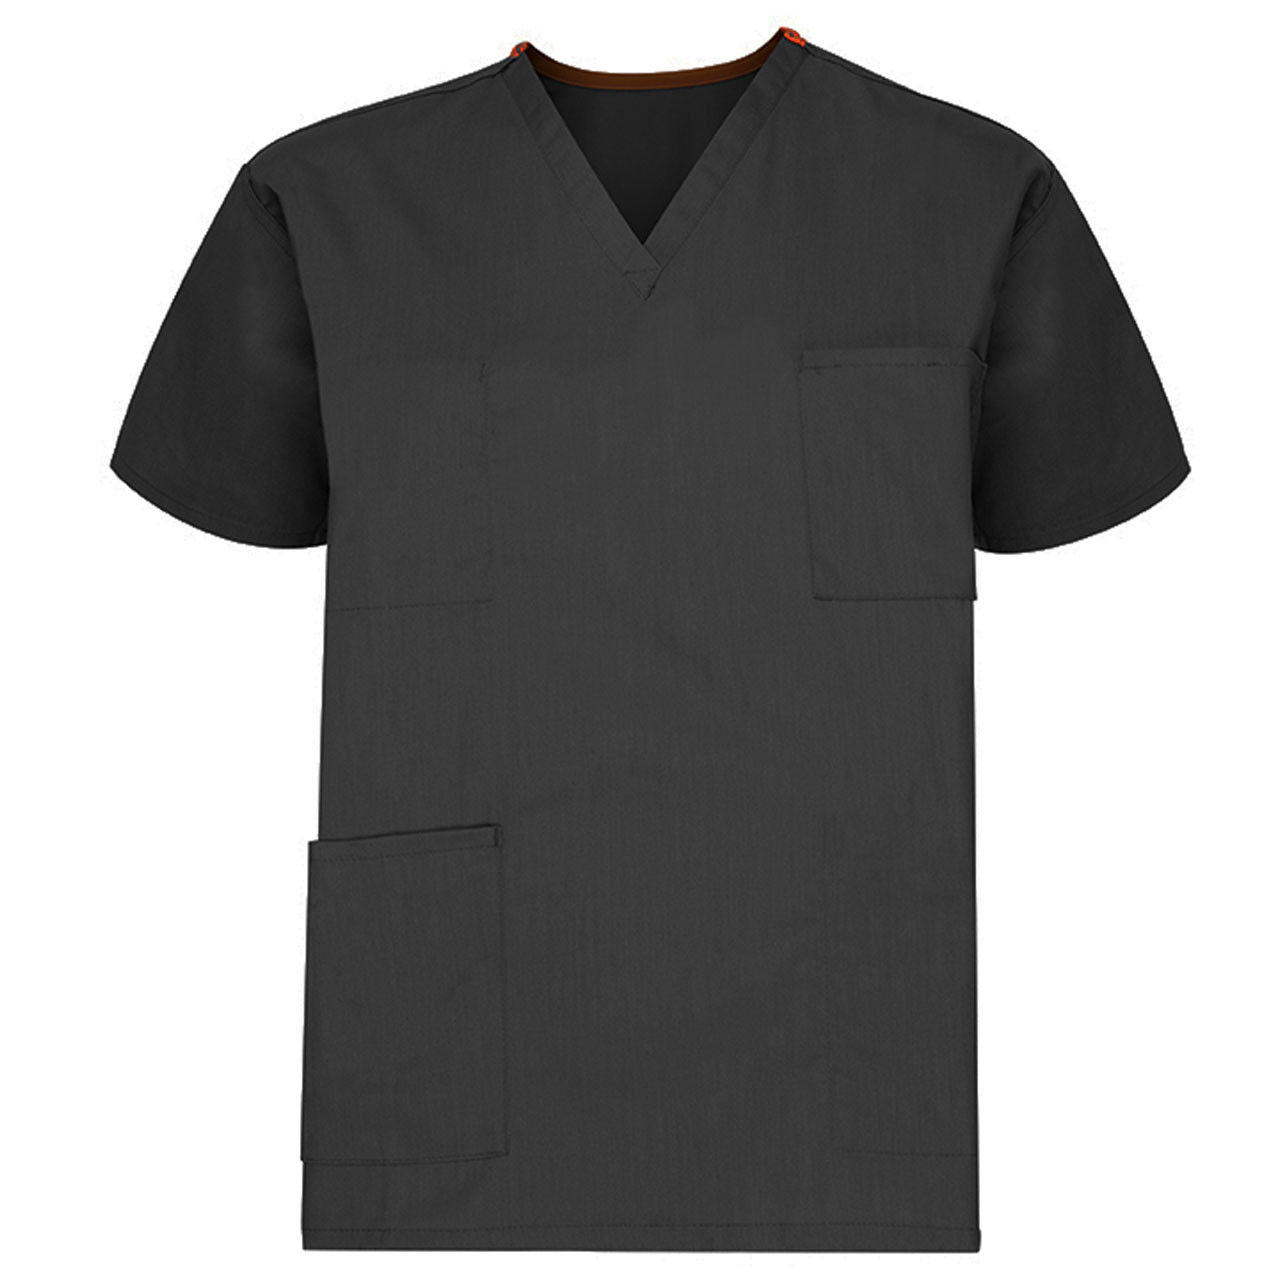 For whom are these unisex reversible scrubs in black a perfect choice?